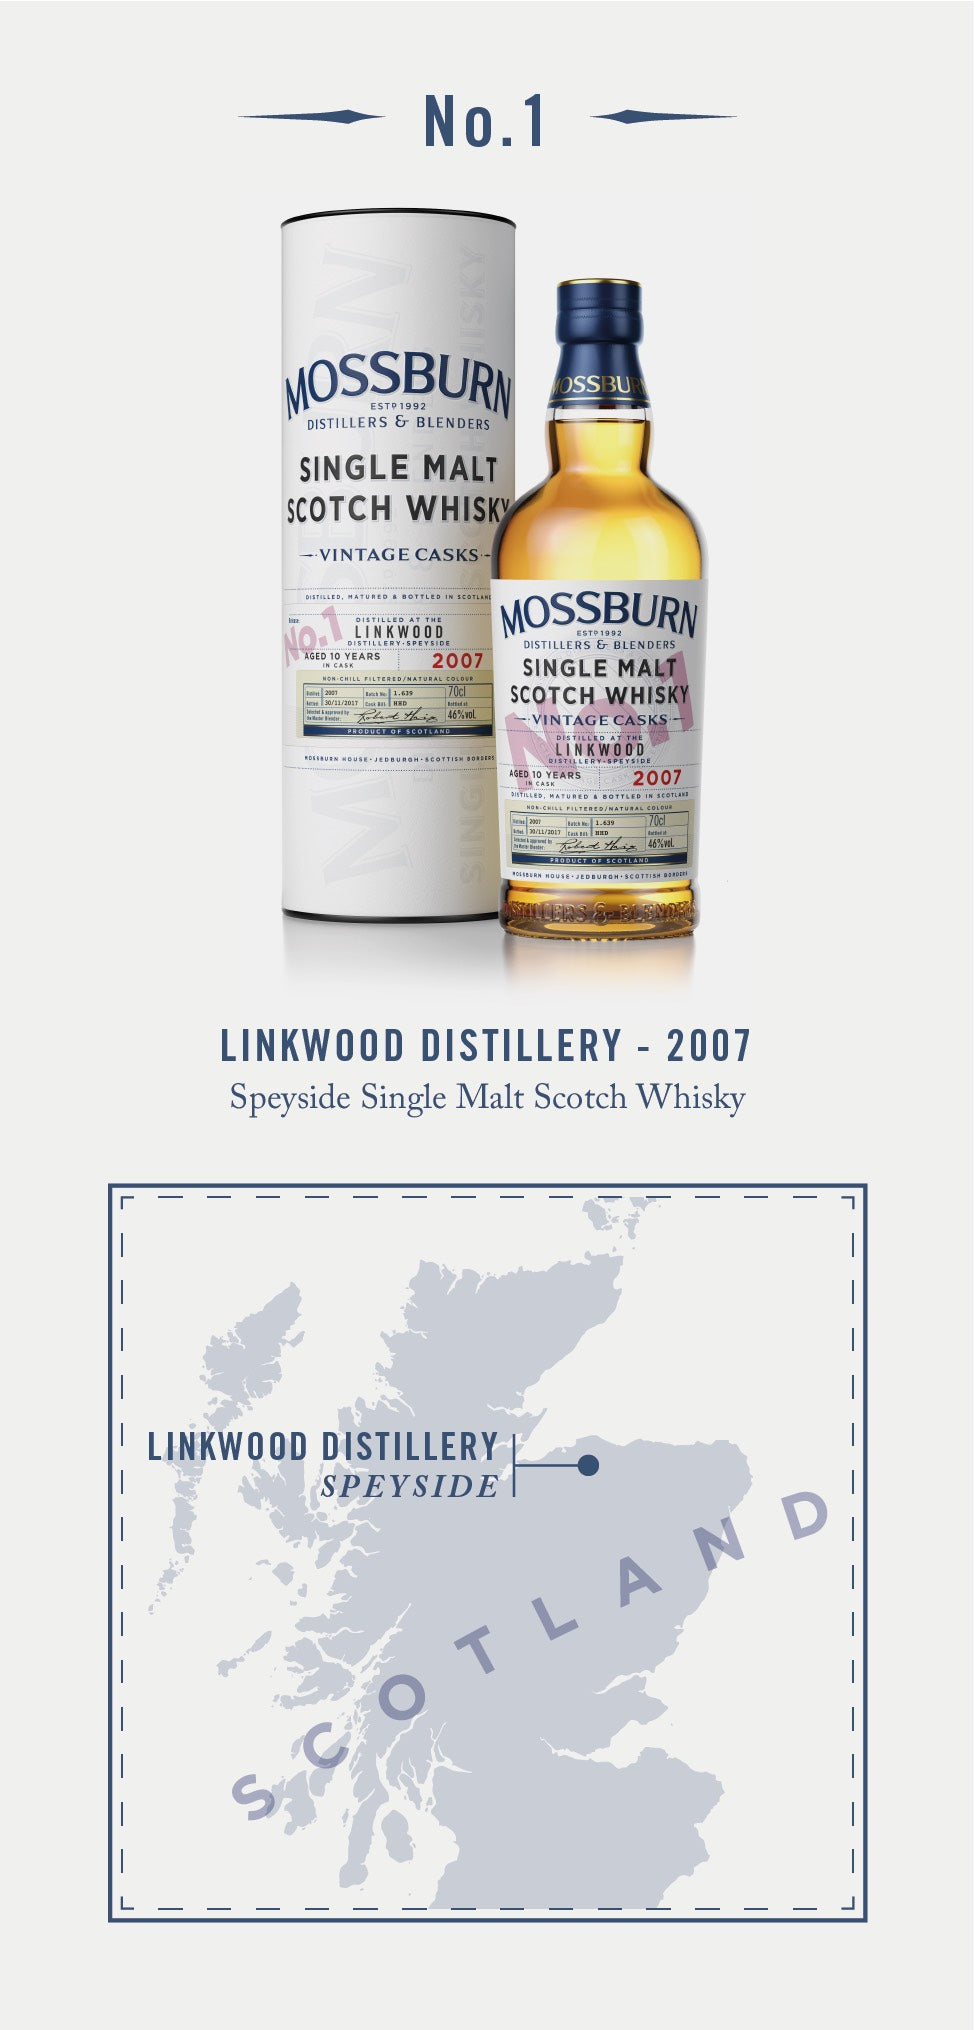 Linkwood 10 Years Old No. 1 Scotch Whisky by Mossburn Distillers